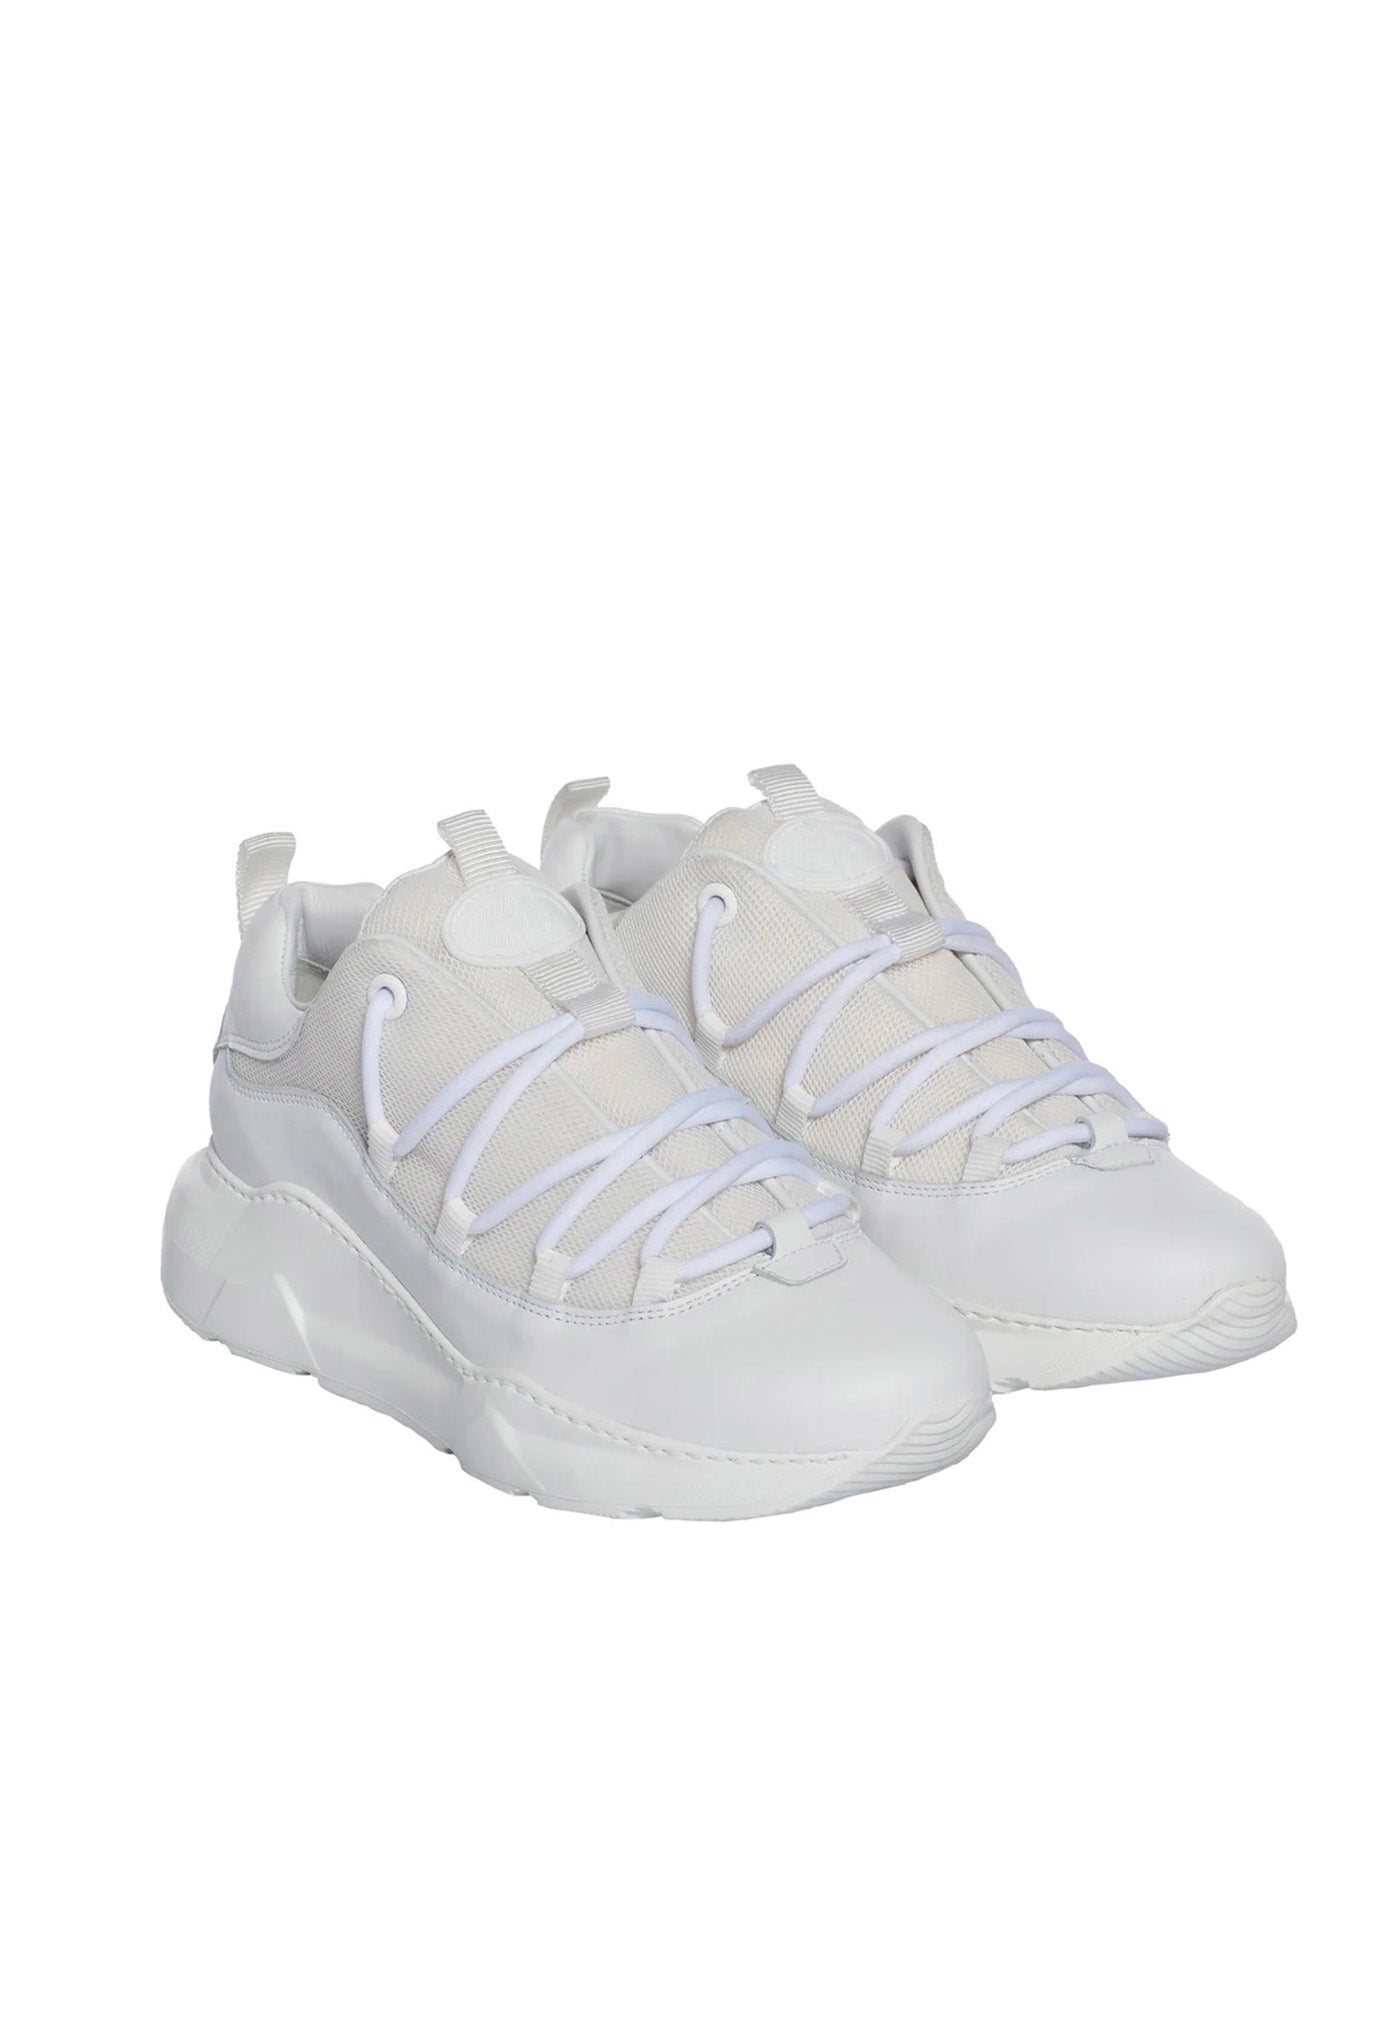 Getty Sneakers - White sold by Angel Divine